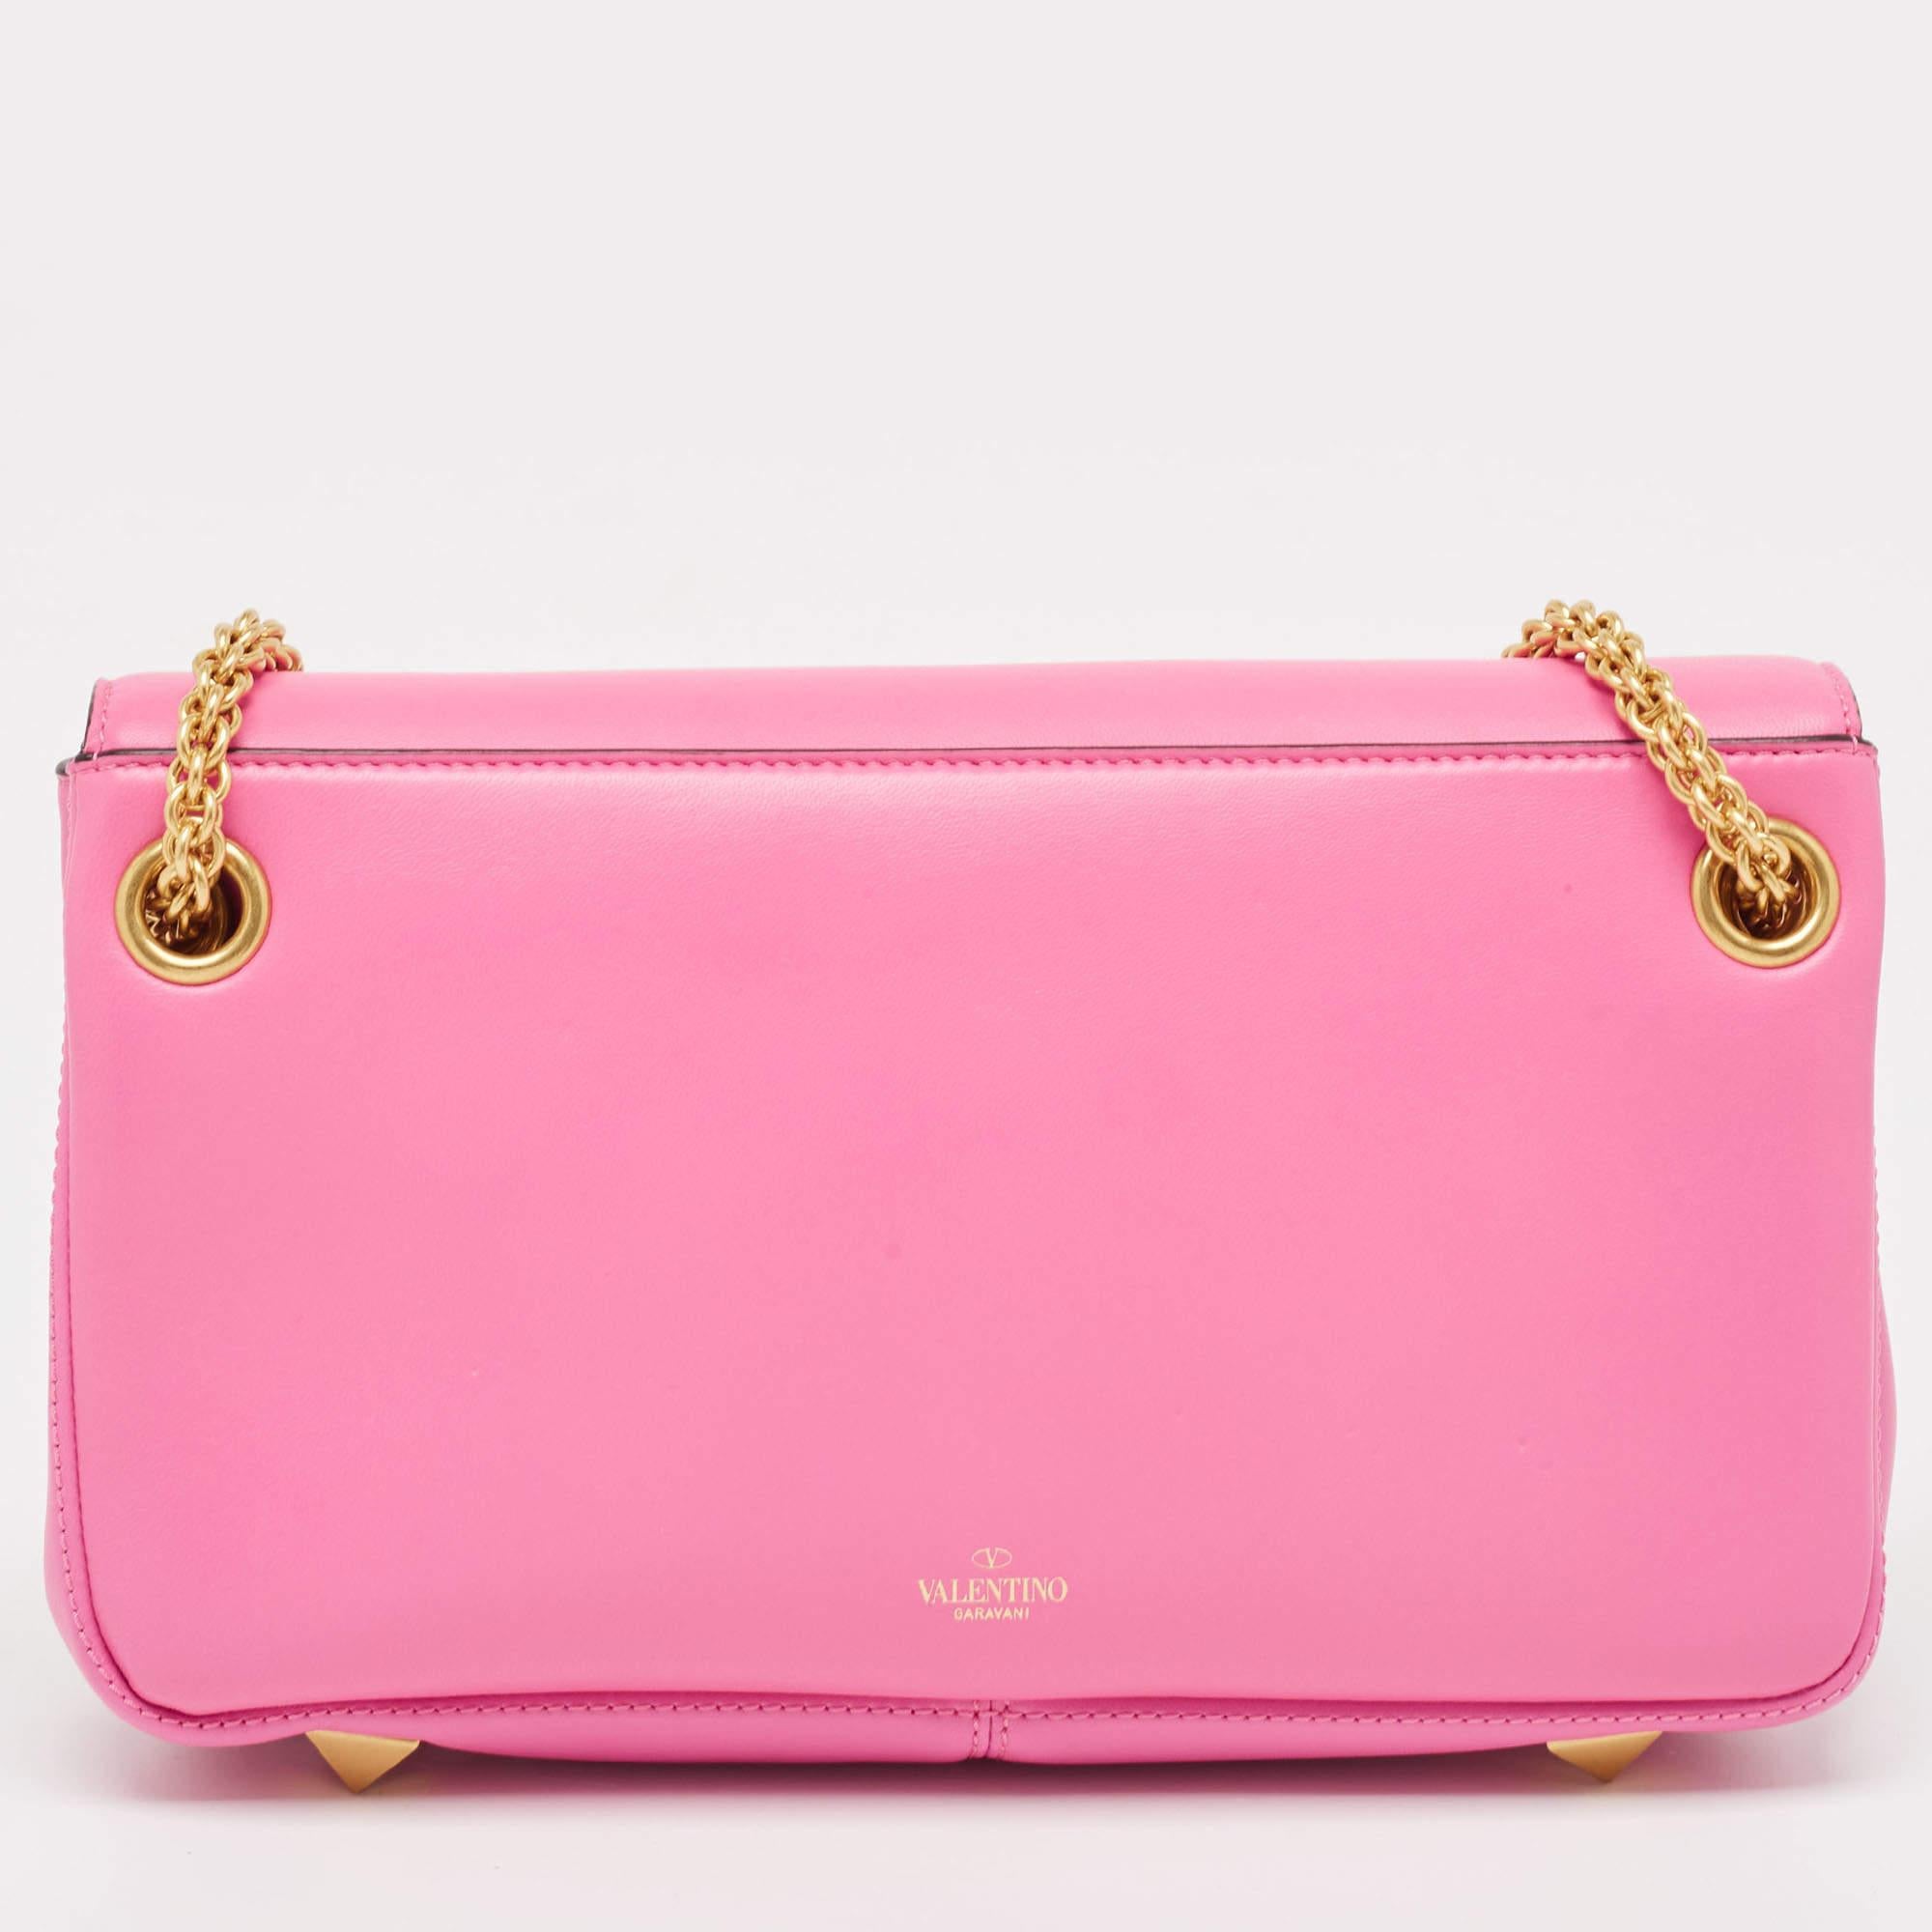 The Valentino handbag is a luxurious accessory crafted with precision. Made from high-quality materials, it features a timeless design with meticulous stitching, signature details, and durable hardware. Well-spaced and stylish, it exudes elegance